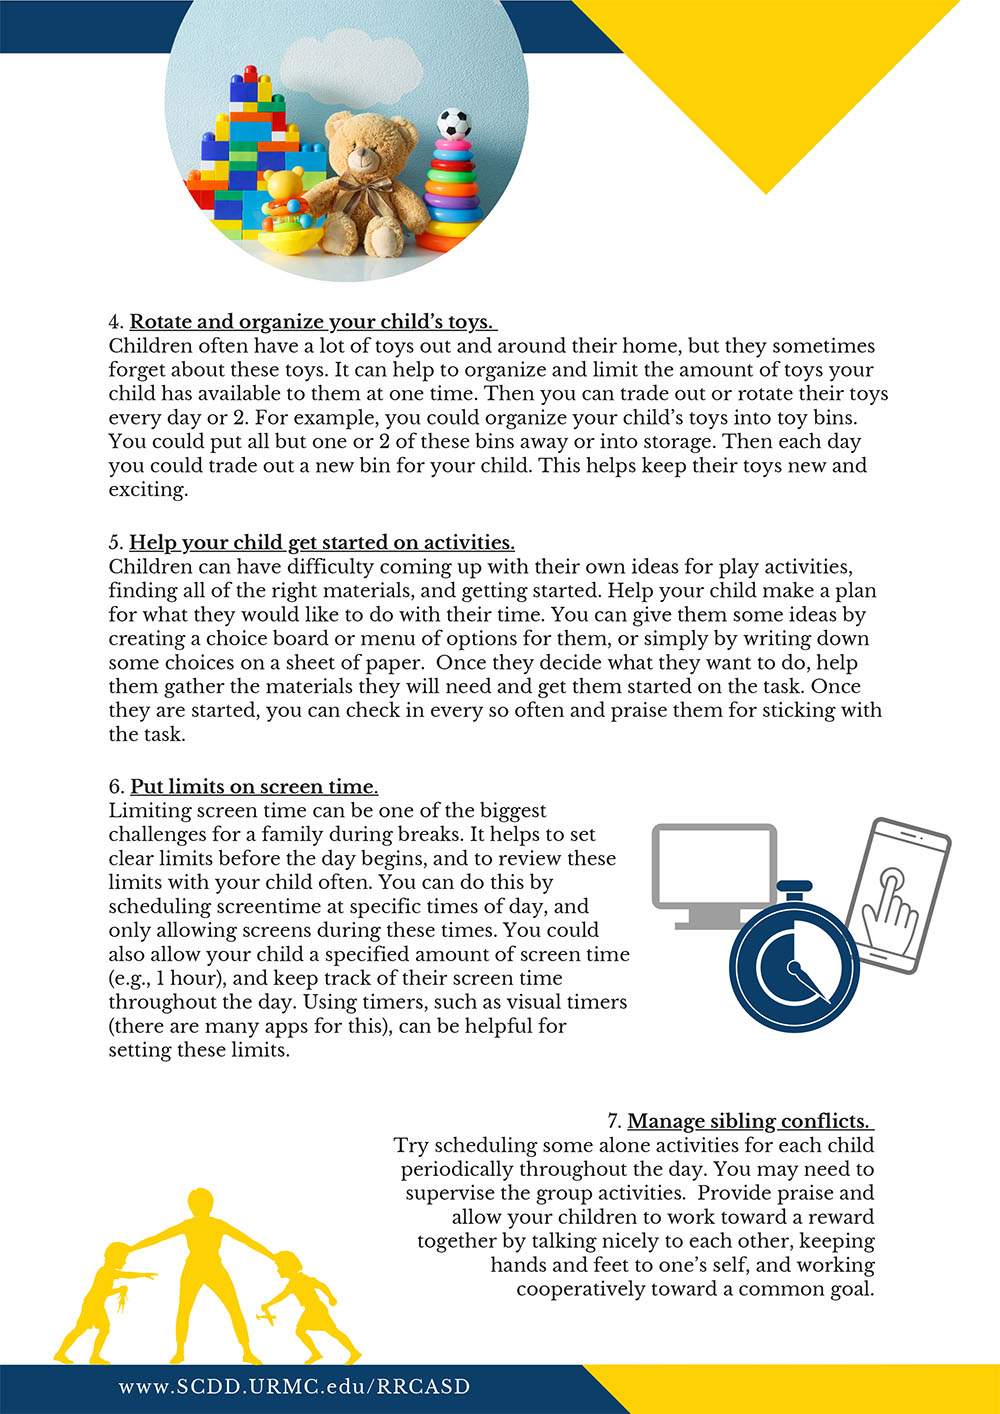 Parenting During Covid-19 Tip Sheet